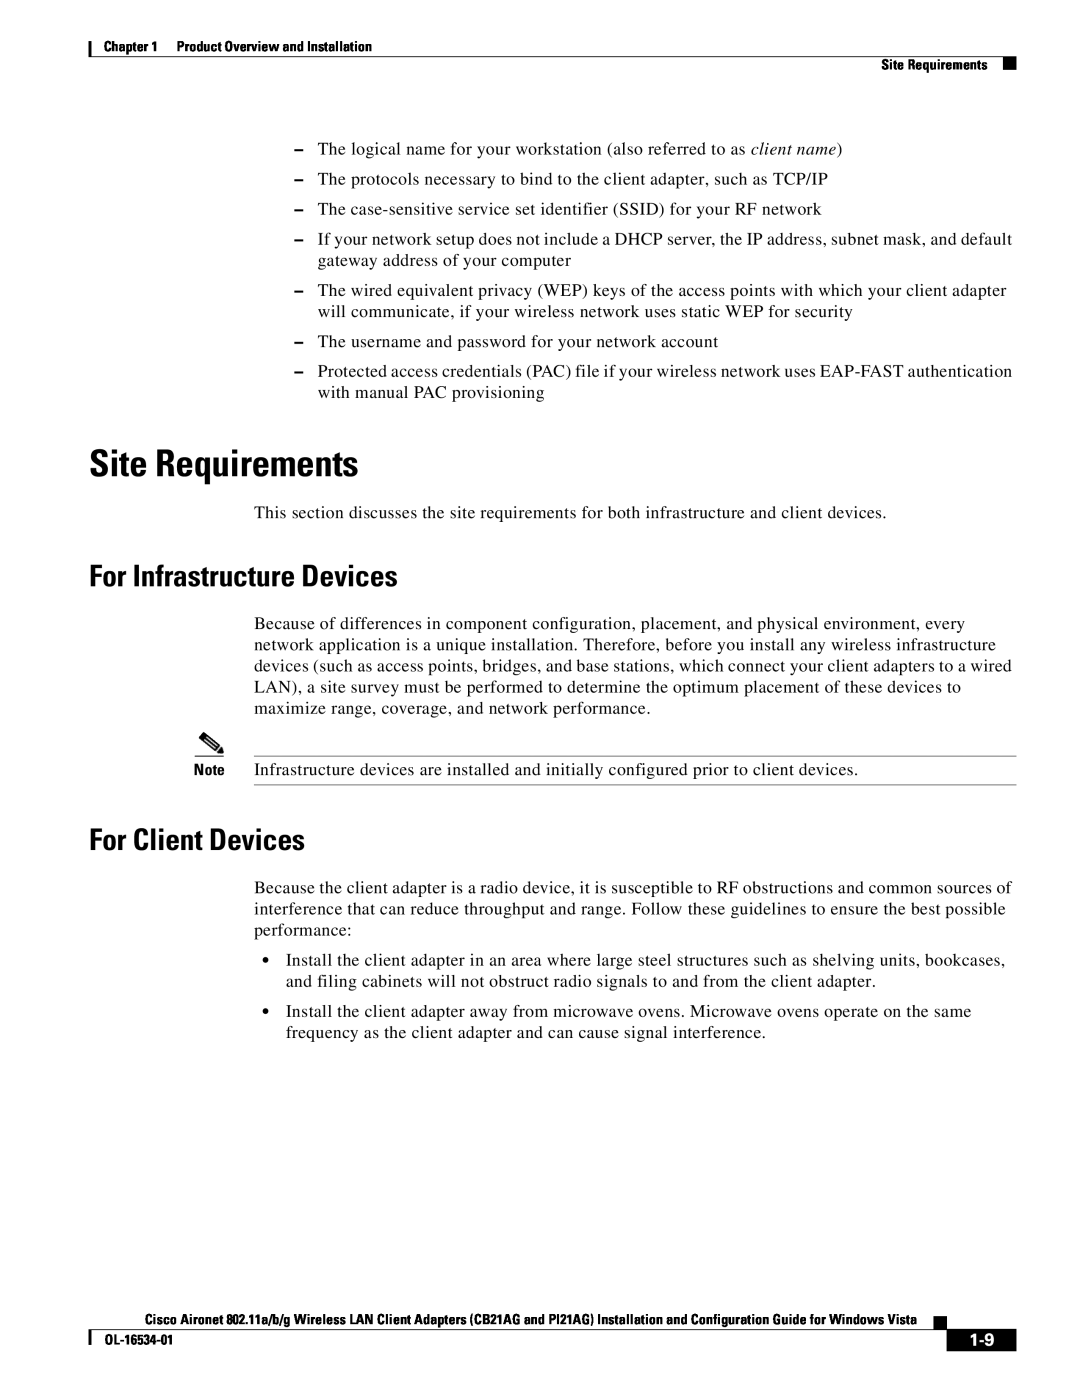 Cisco Systems CB21AG, PI21AG manual Site Requirements, For Infrastructure Devices, For Client Devices 